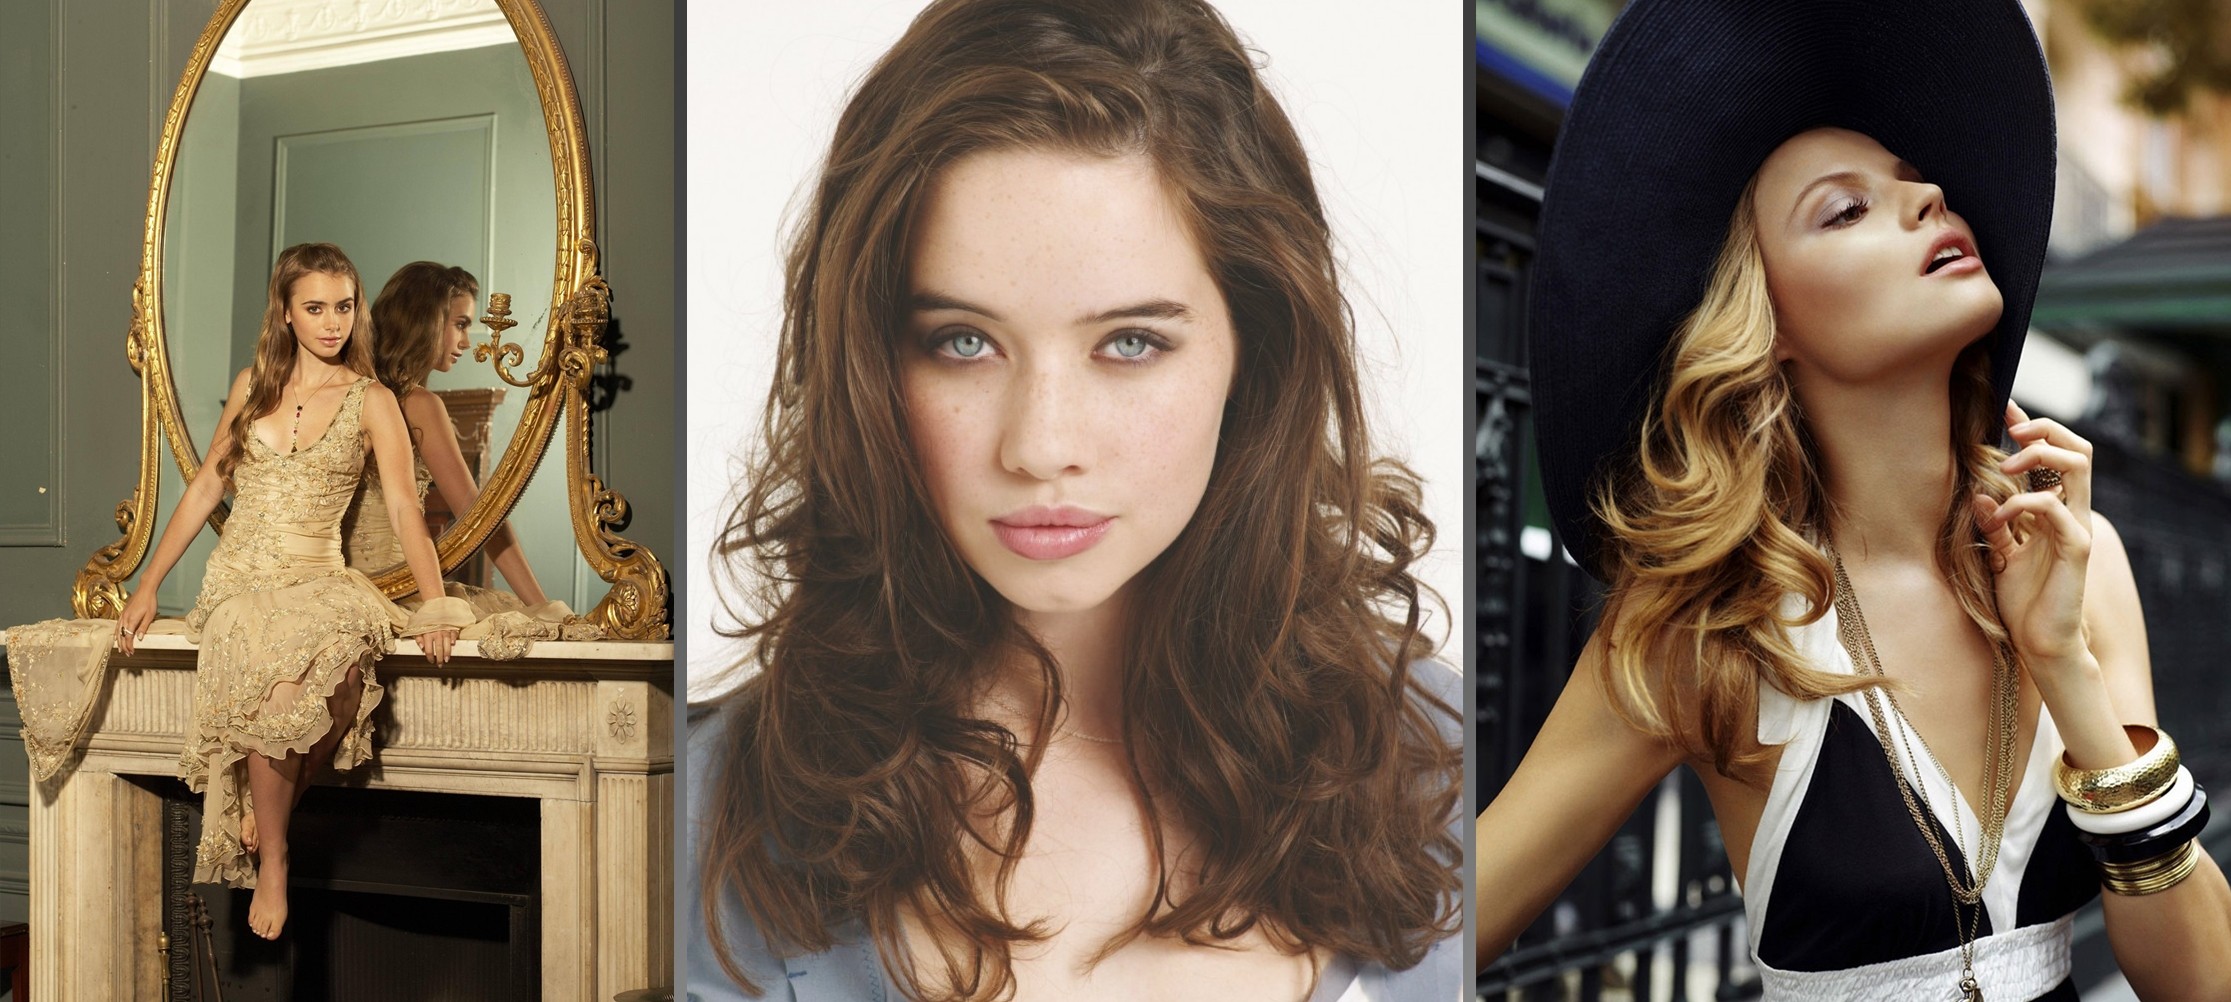 People 2231x1002 collage women model face portrait mirror Anna Popplewell Lily Collins